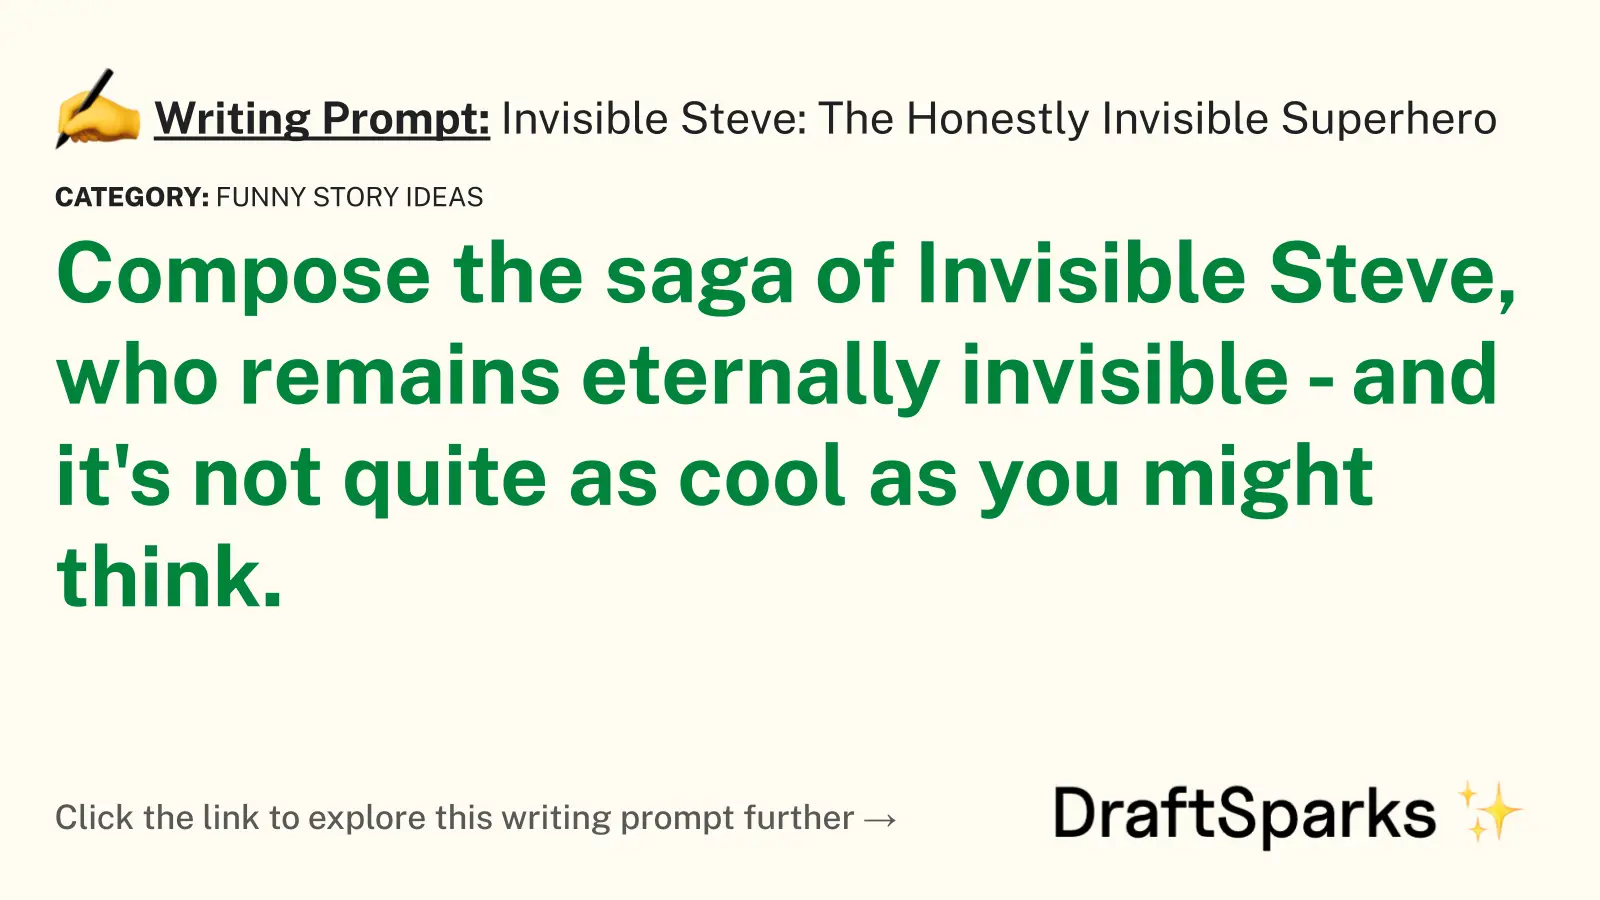 Invisible Steve: The Honestly Invisible Superhero